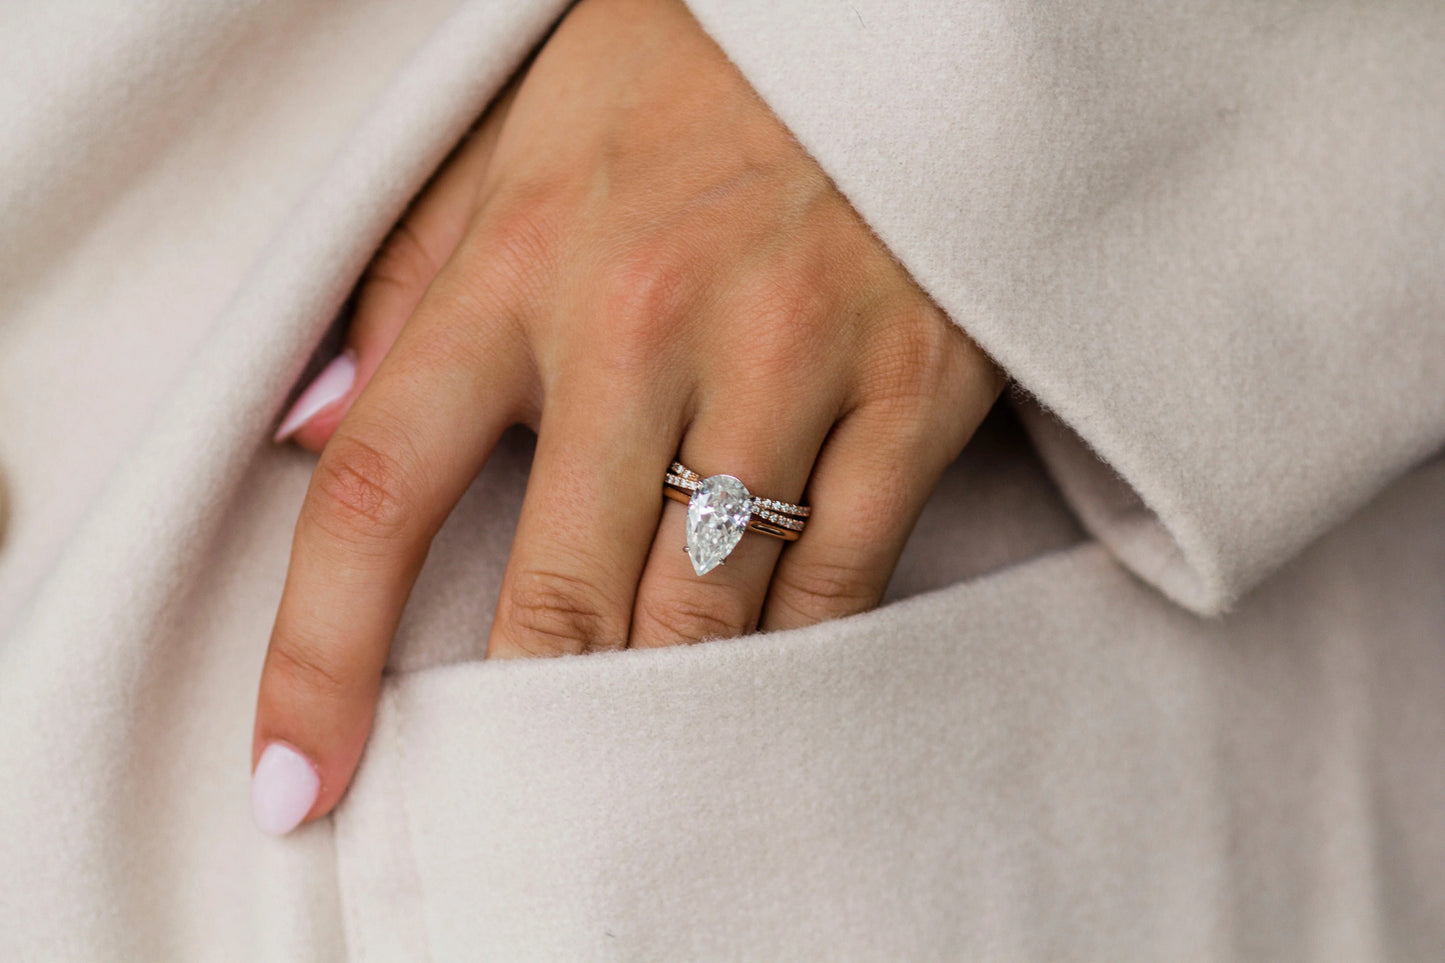 3 Carat Pear Cut Moissanite Diamond Engagement Ring with a Solitaire Band and Shoulder Accents